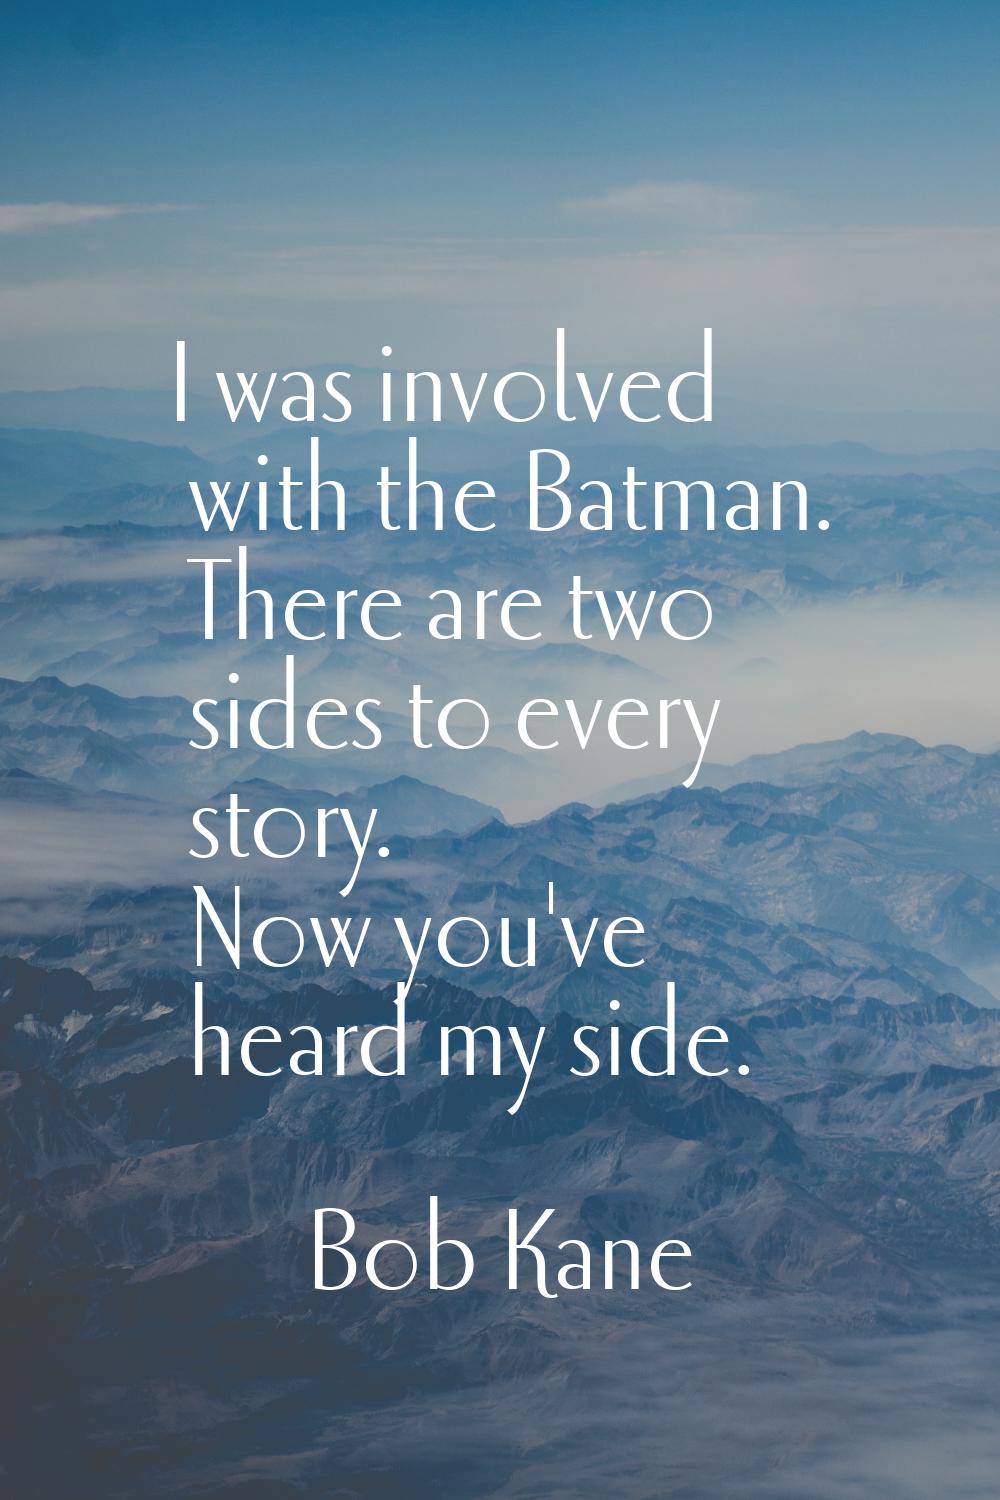 I was involved with the Batman. There are two sides to every story. Now you've heard my side.